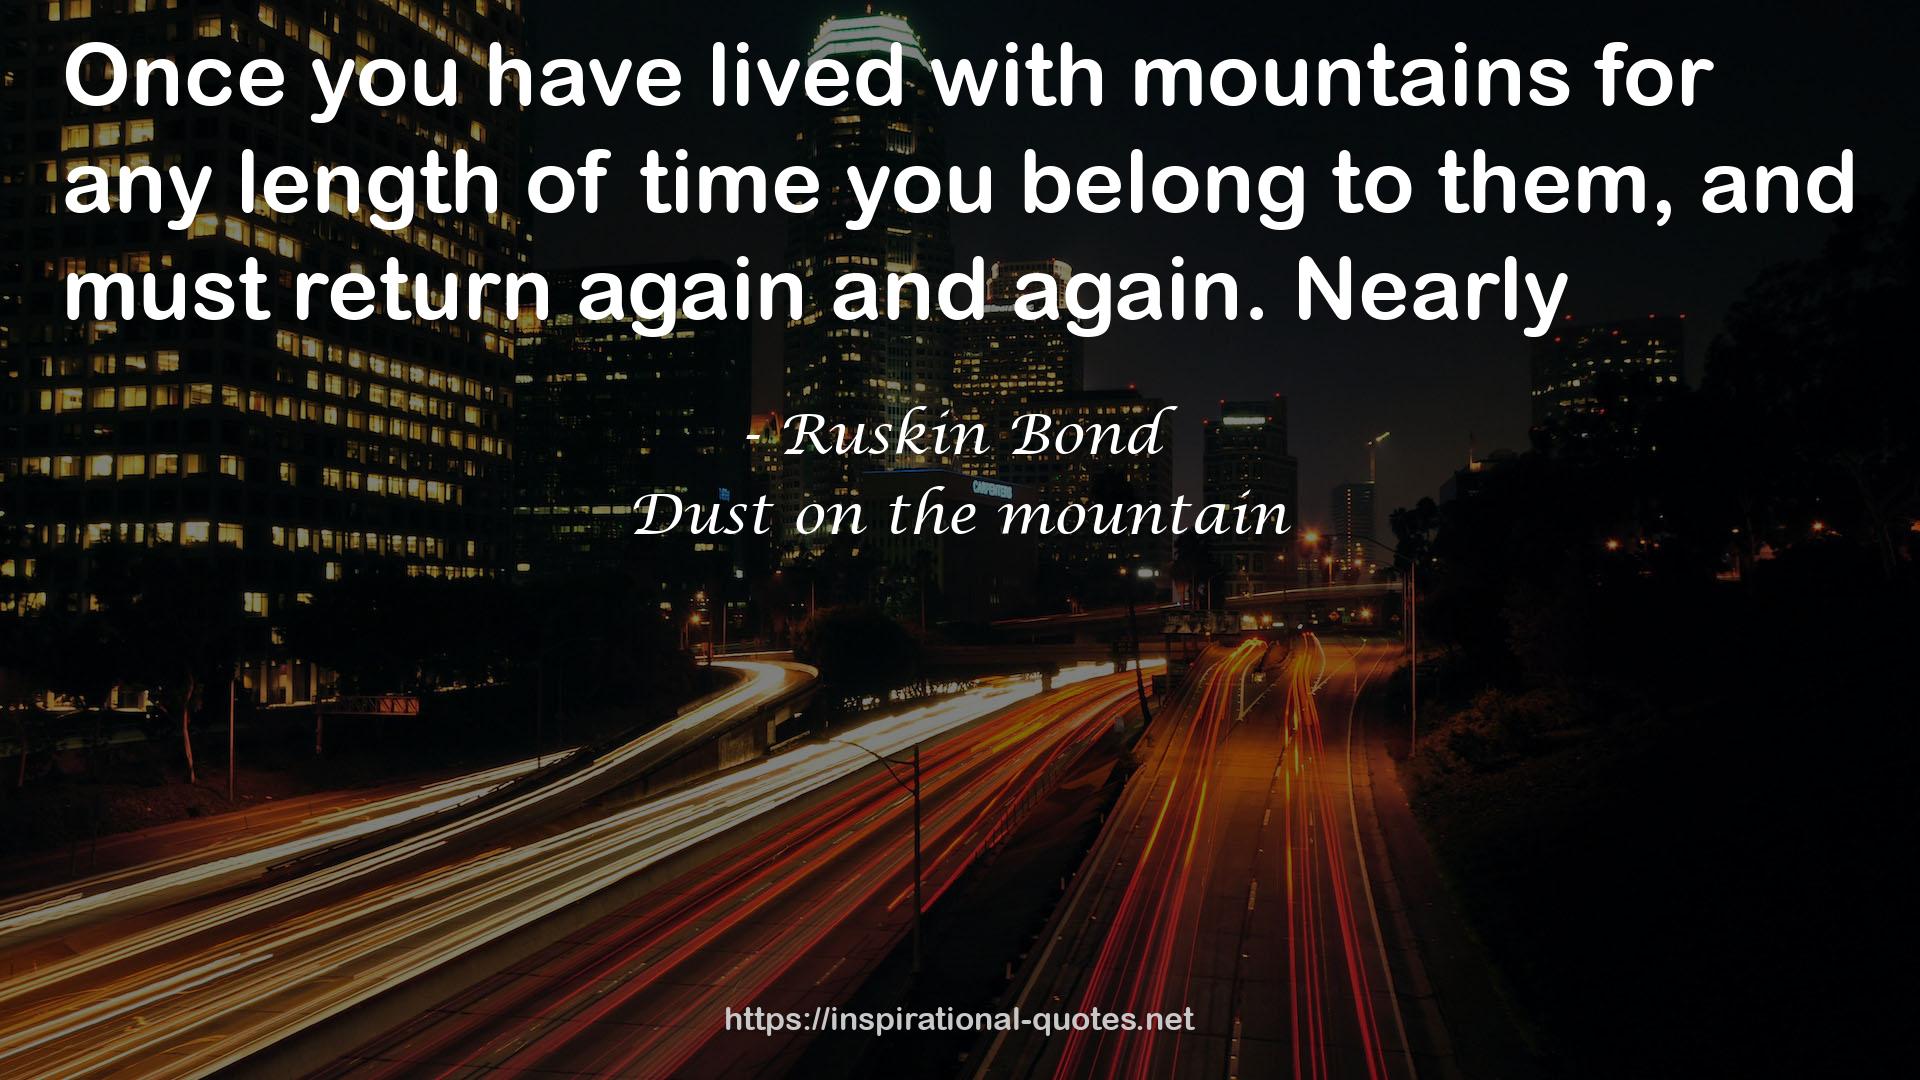 Dust on the mountain QUOTES